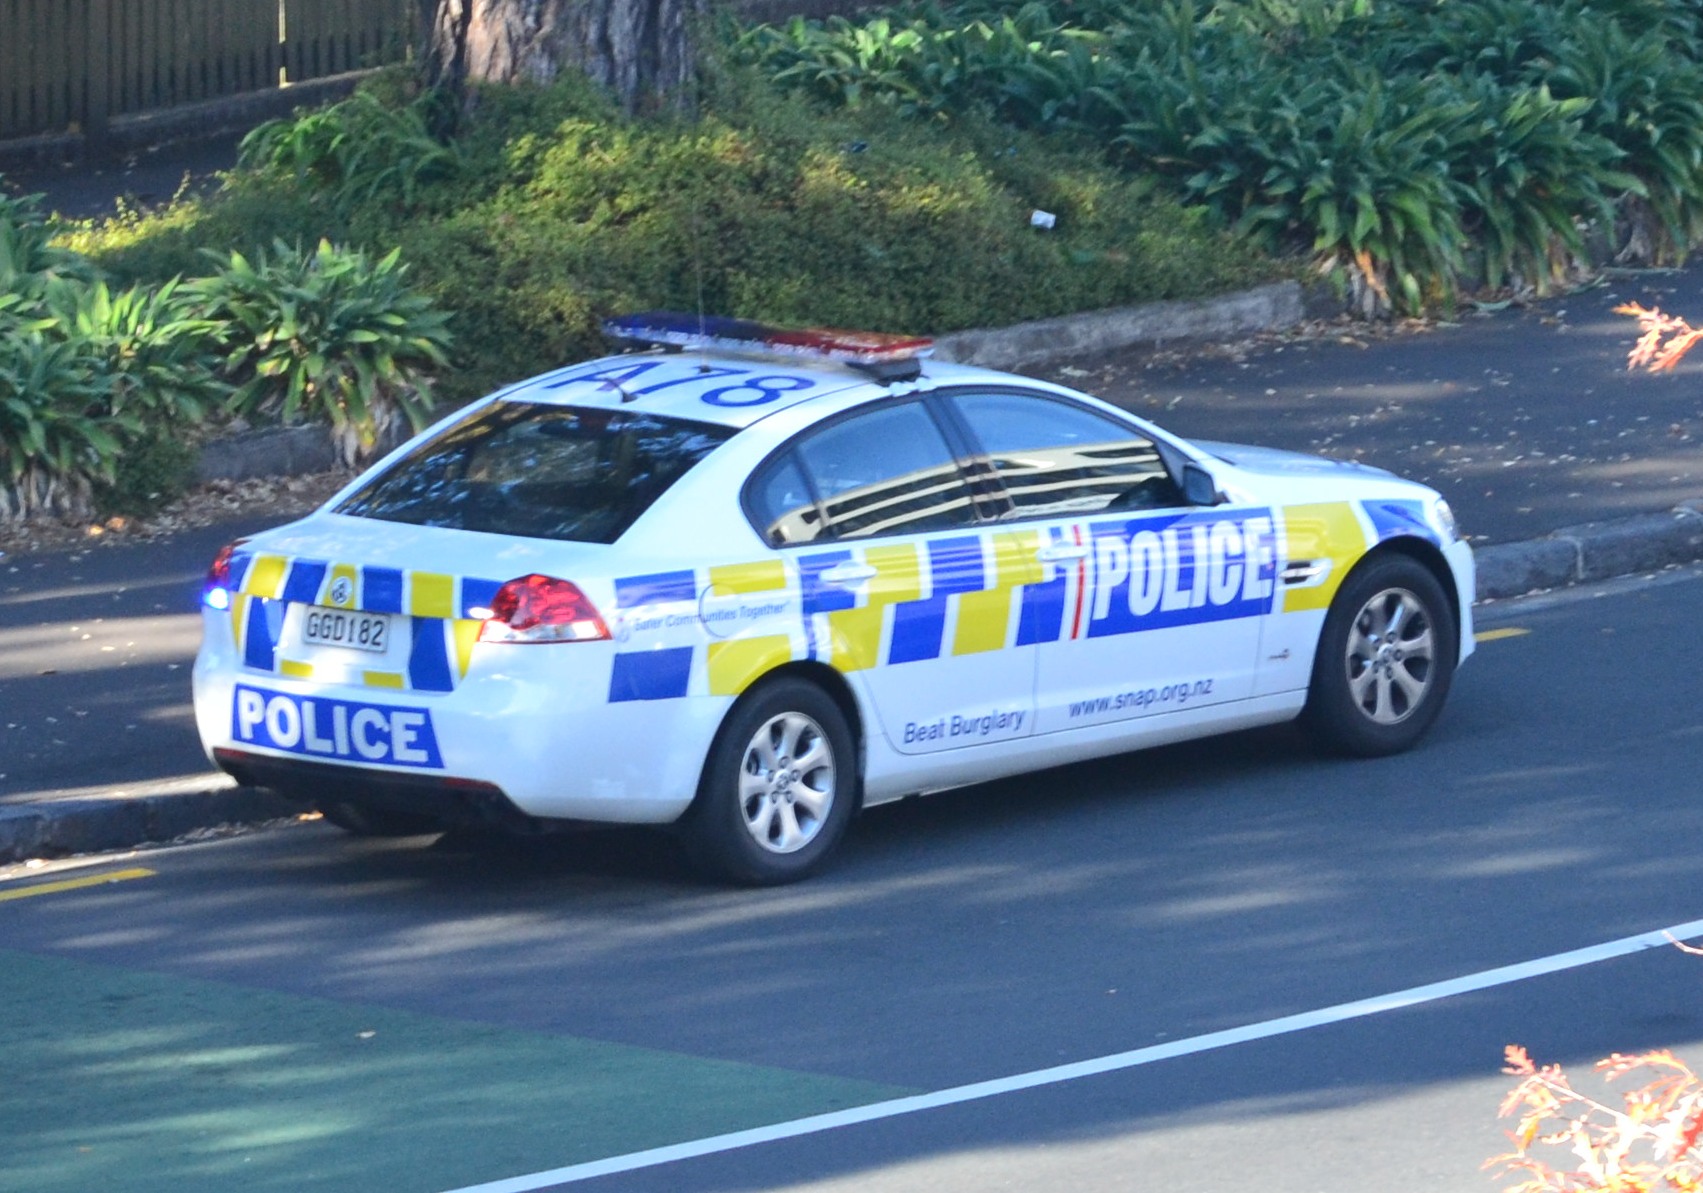 a police car that is sitting in the street